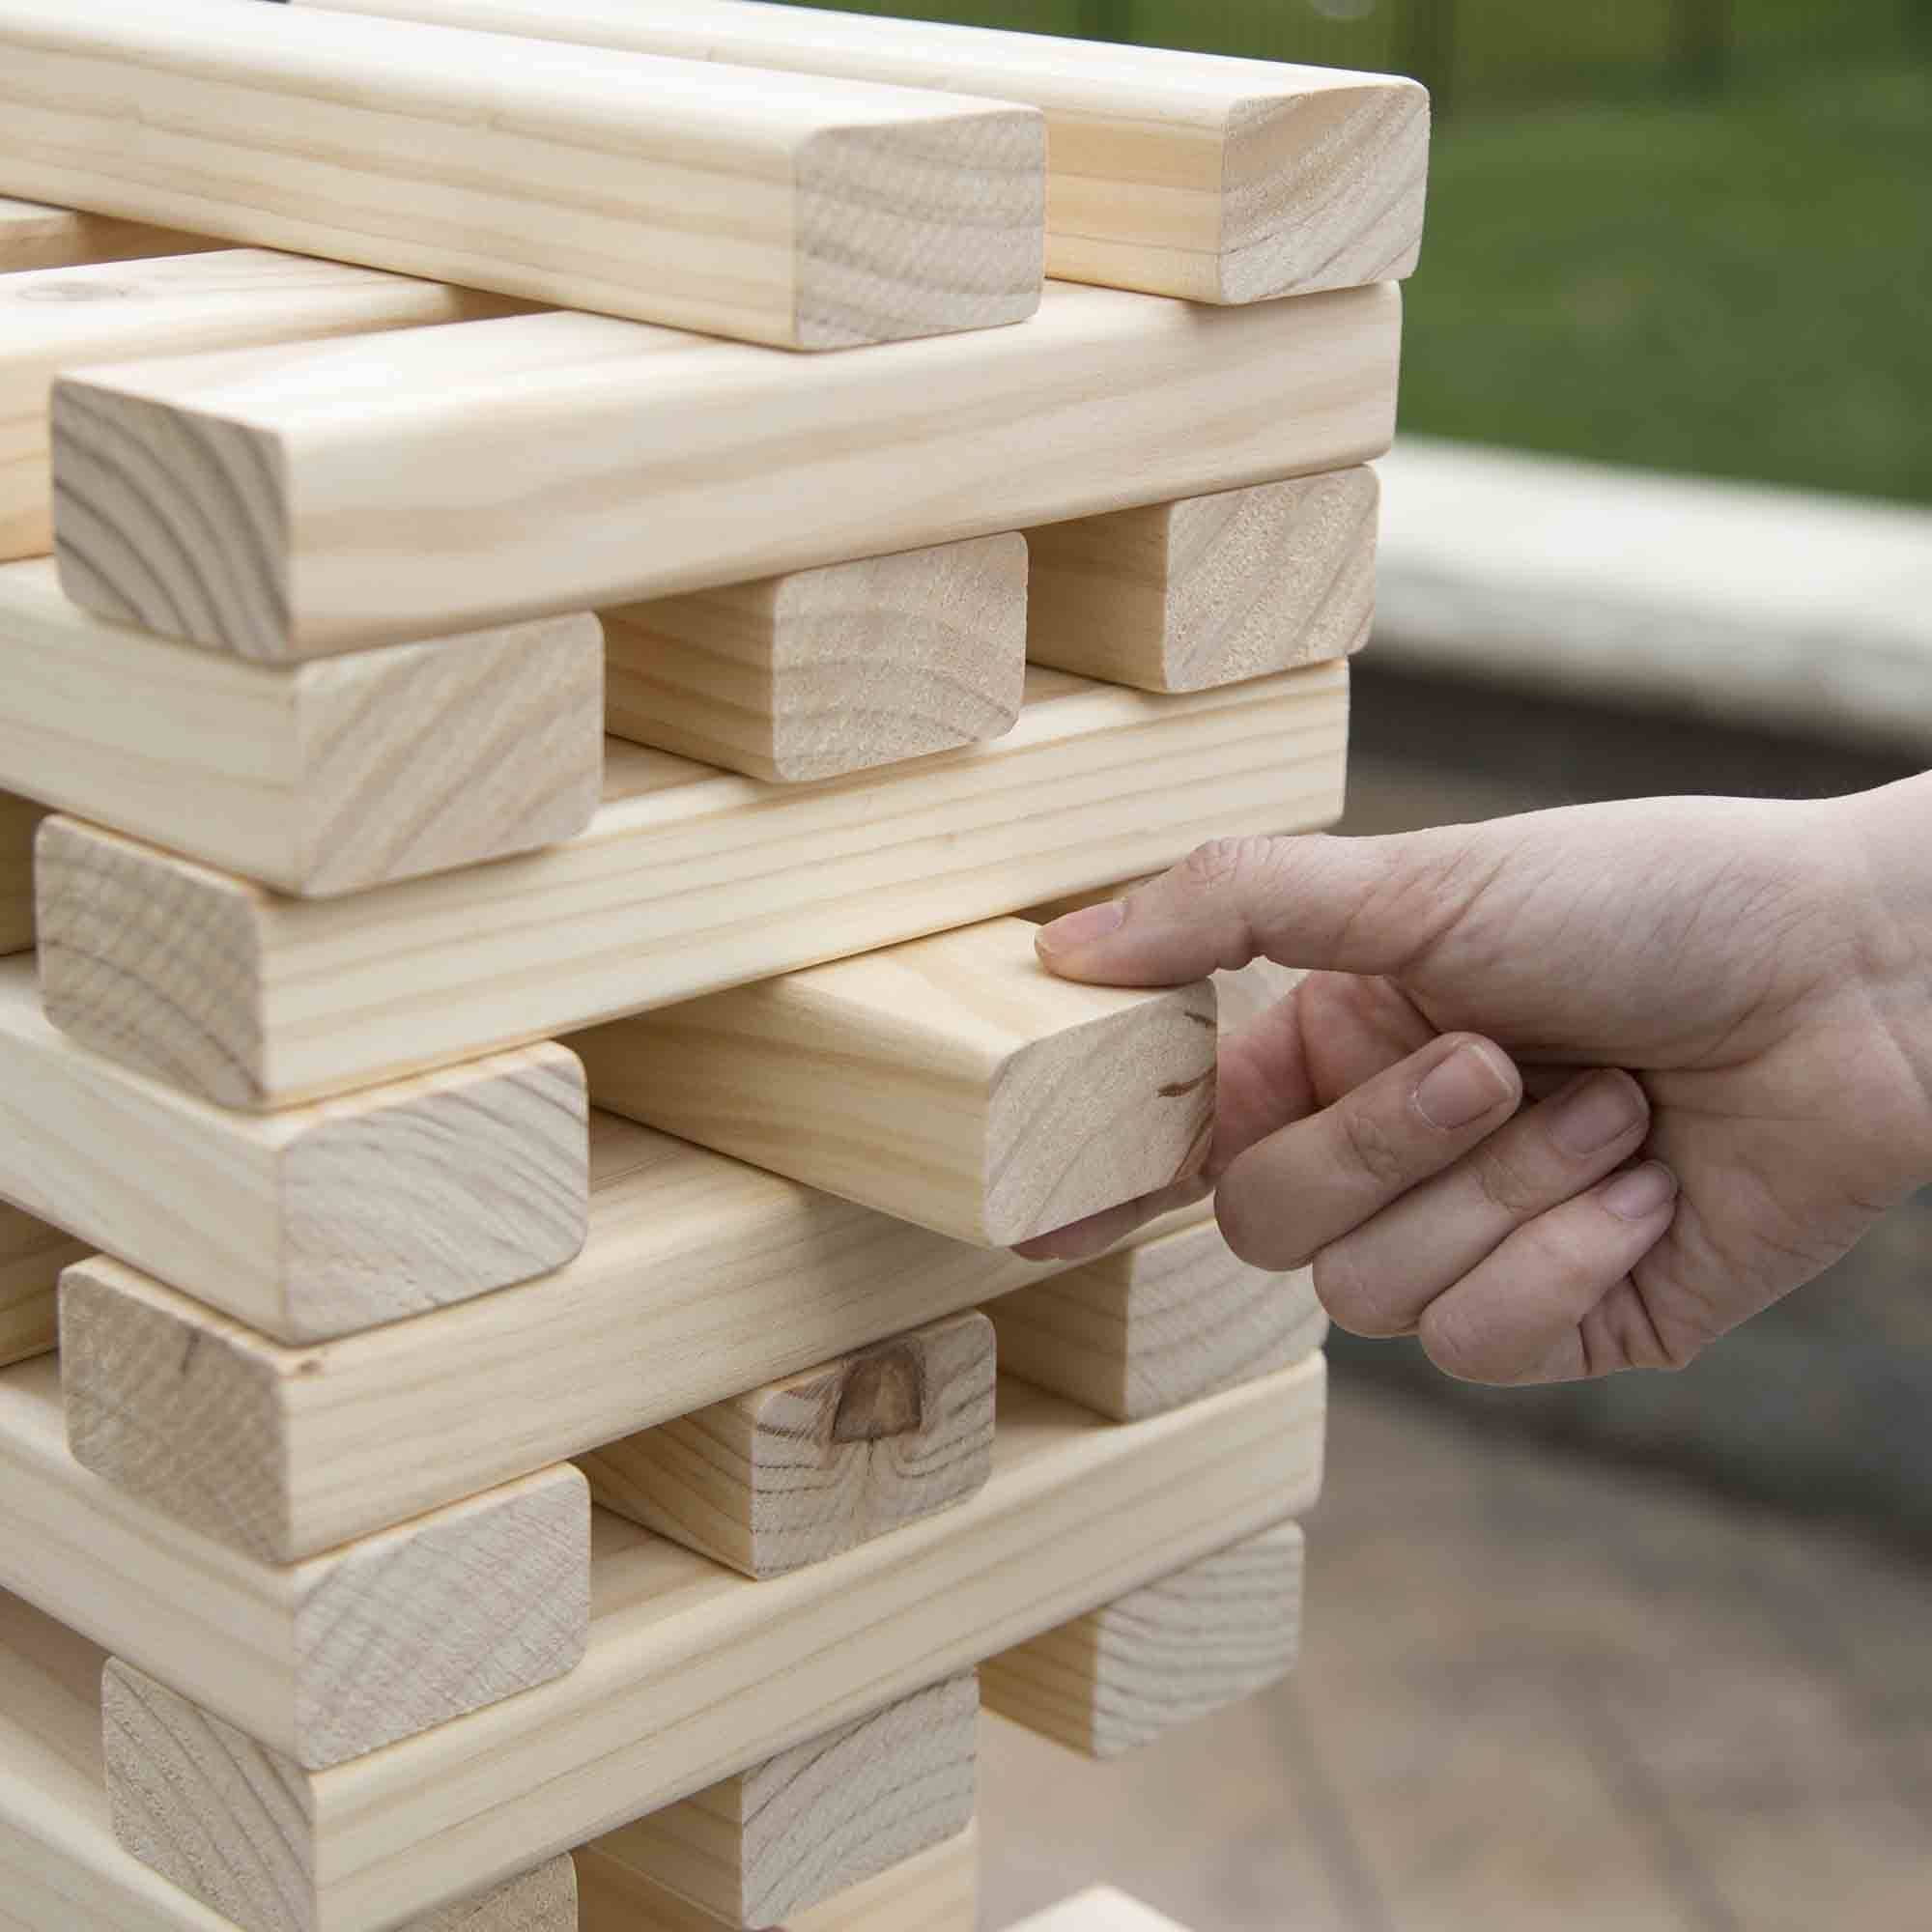 Nontraditional Giant Wooden Blocks Tower Stacking Game, Outdoor